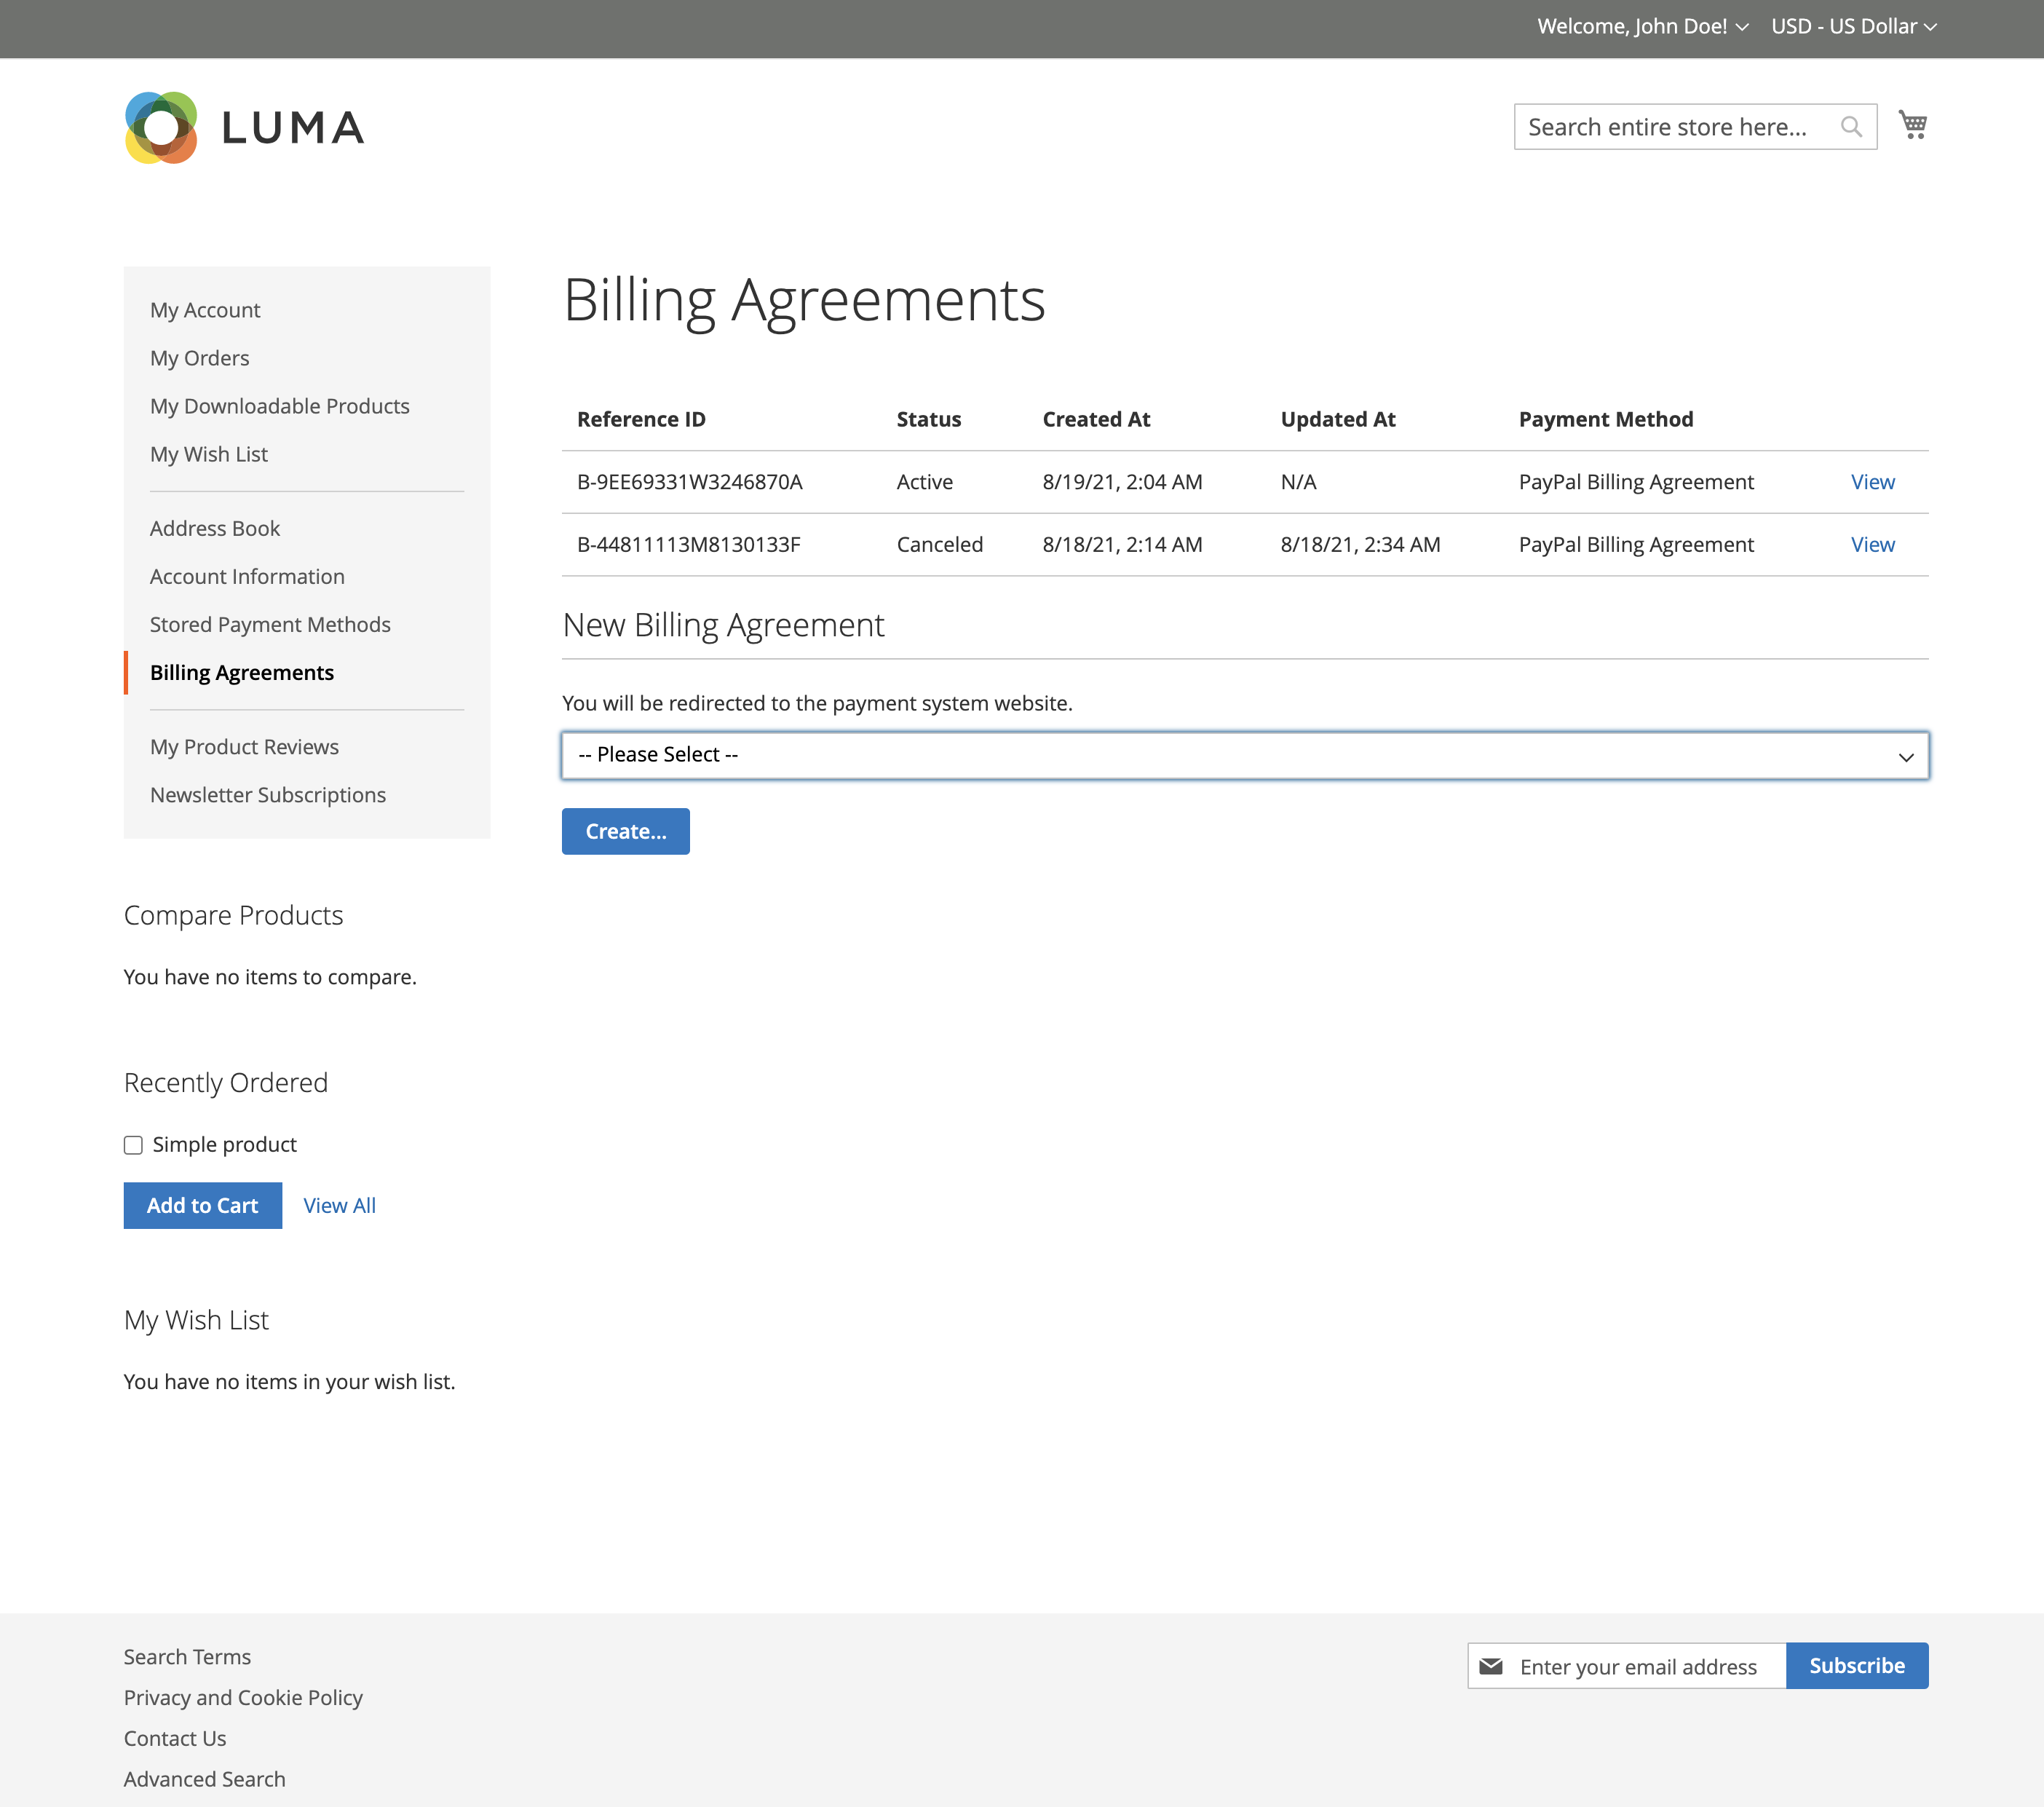 Billing agreements list in the customer's dashboard